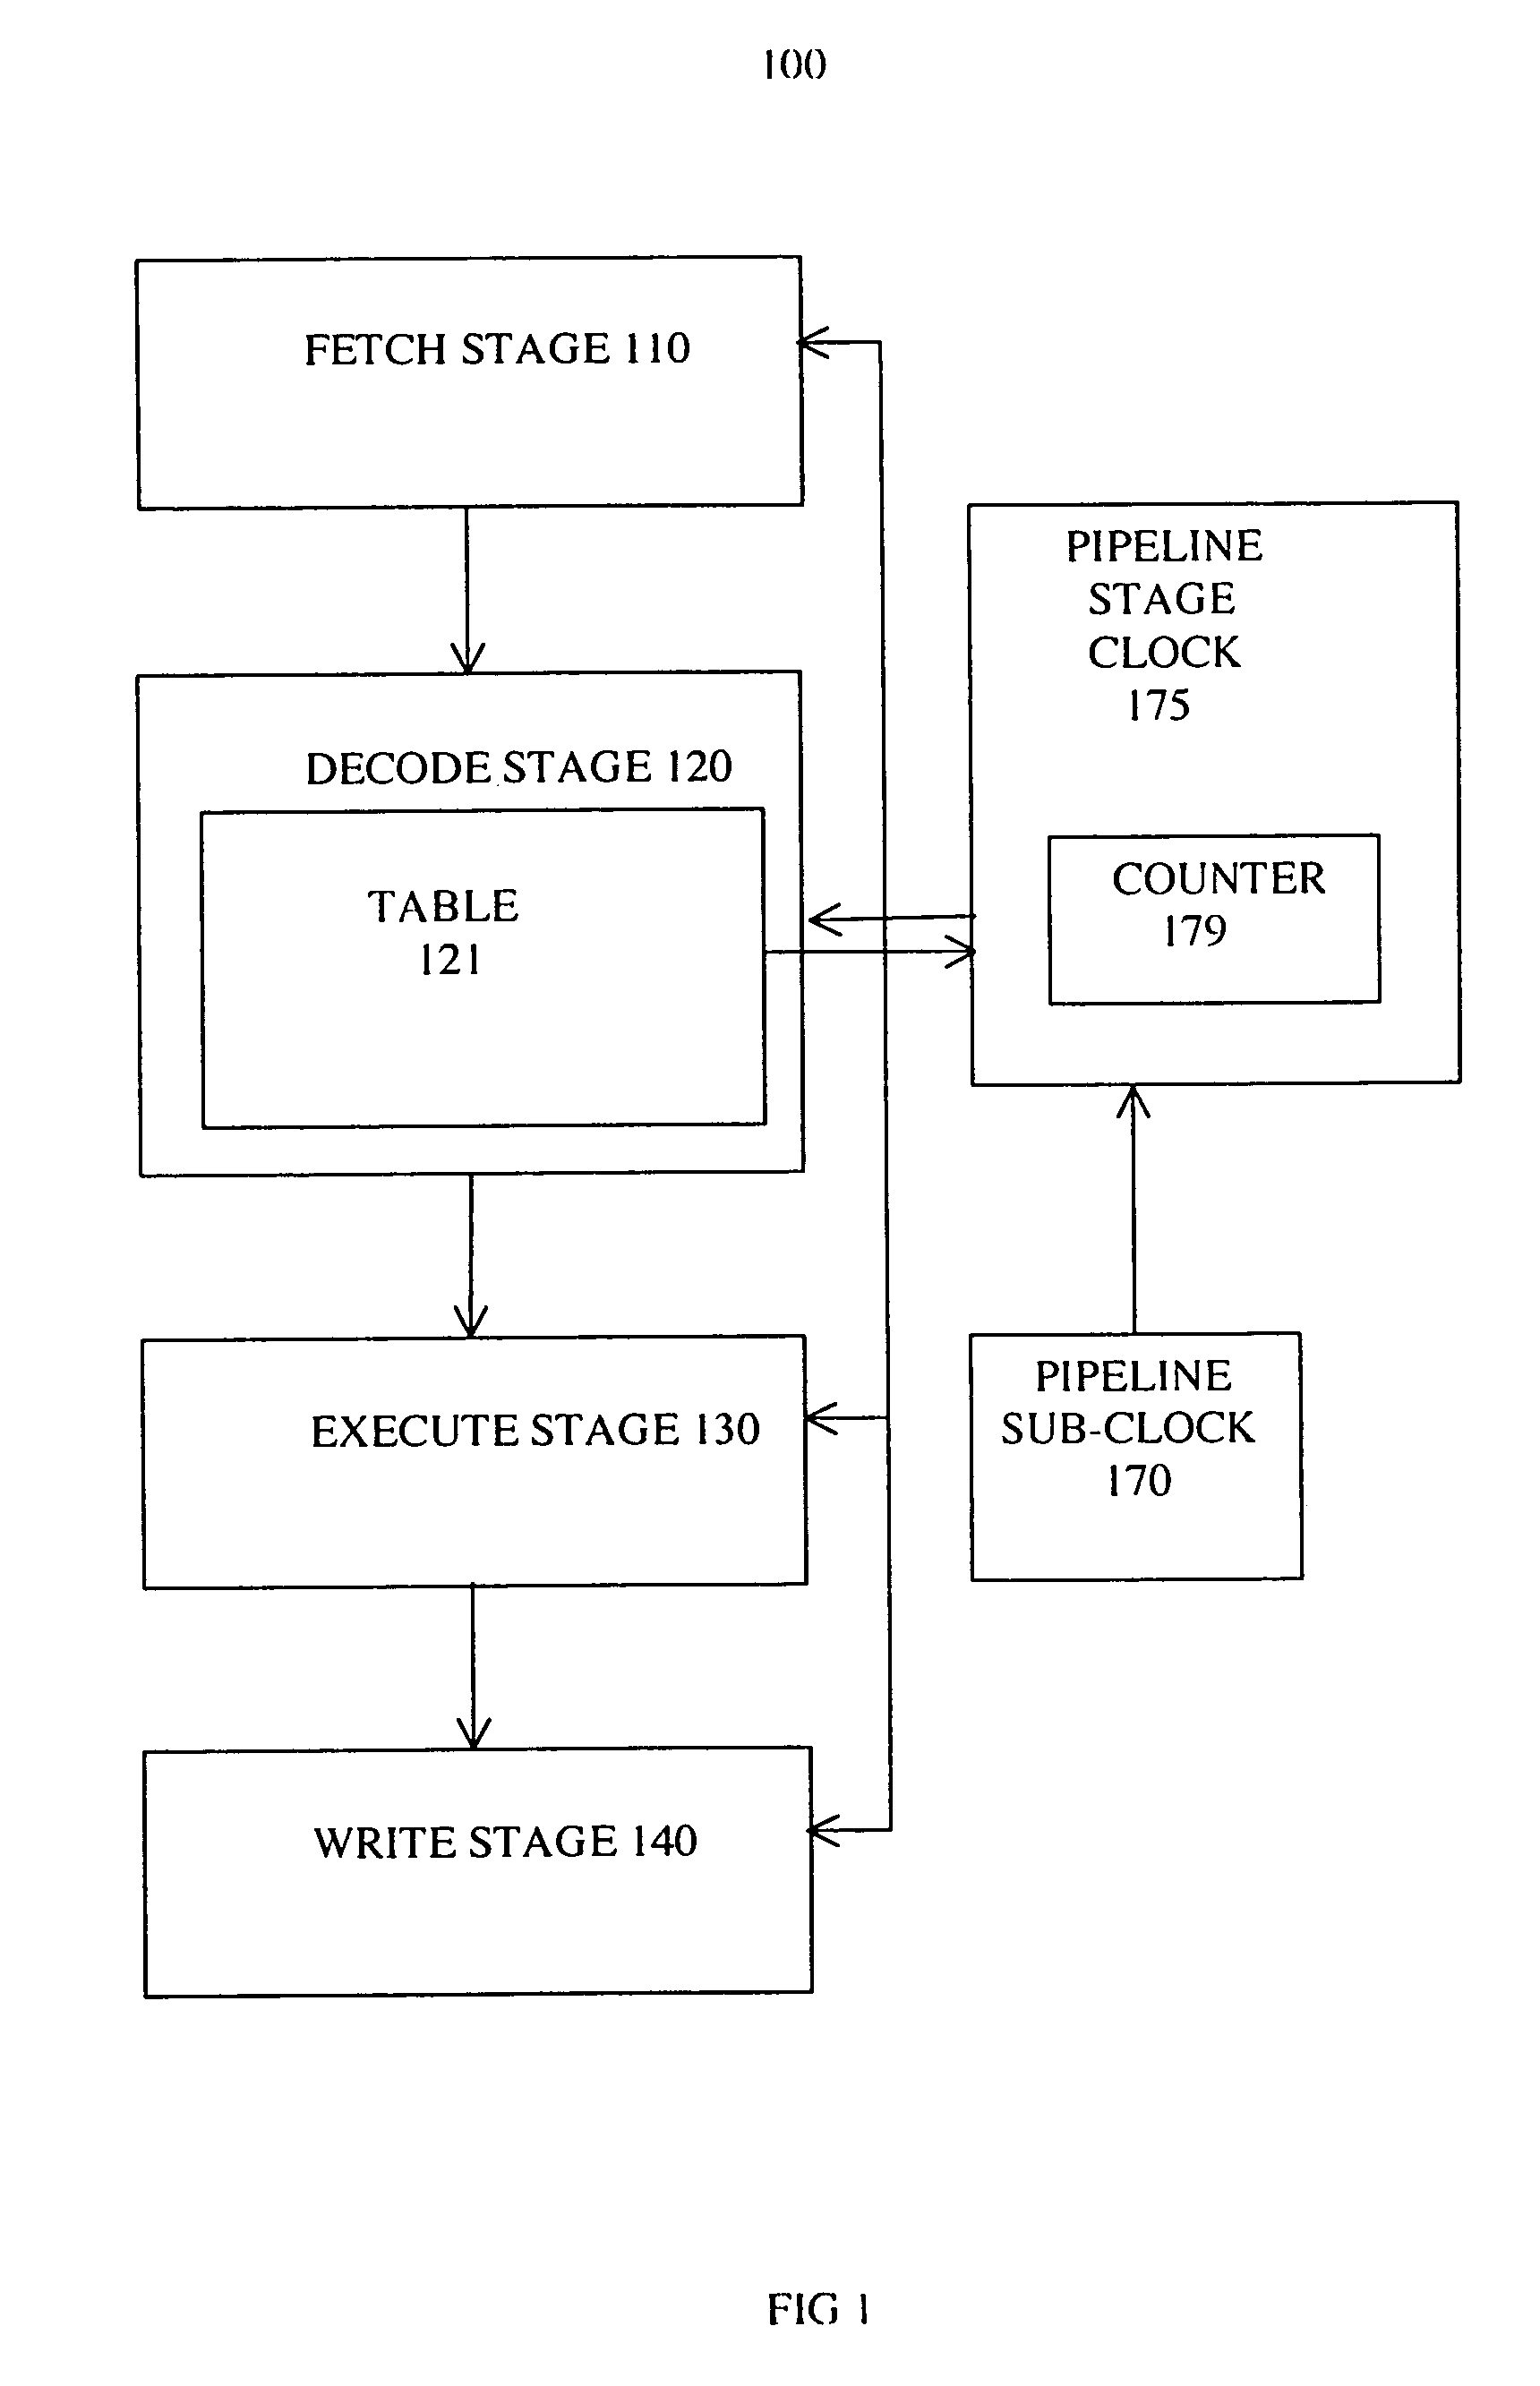 Adjustable cycle pipeline system and method